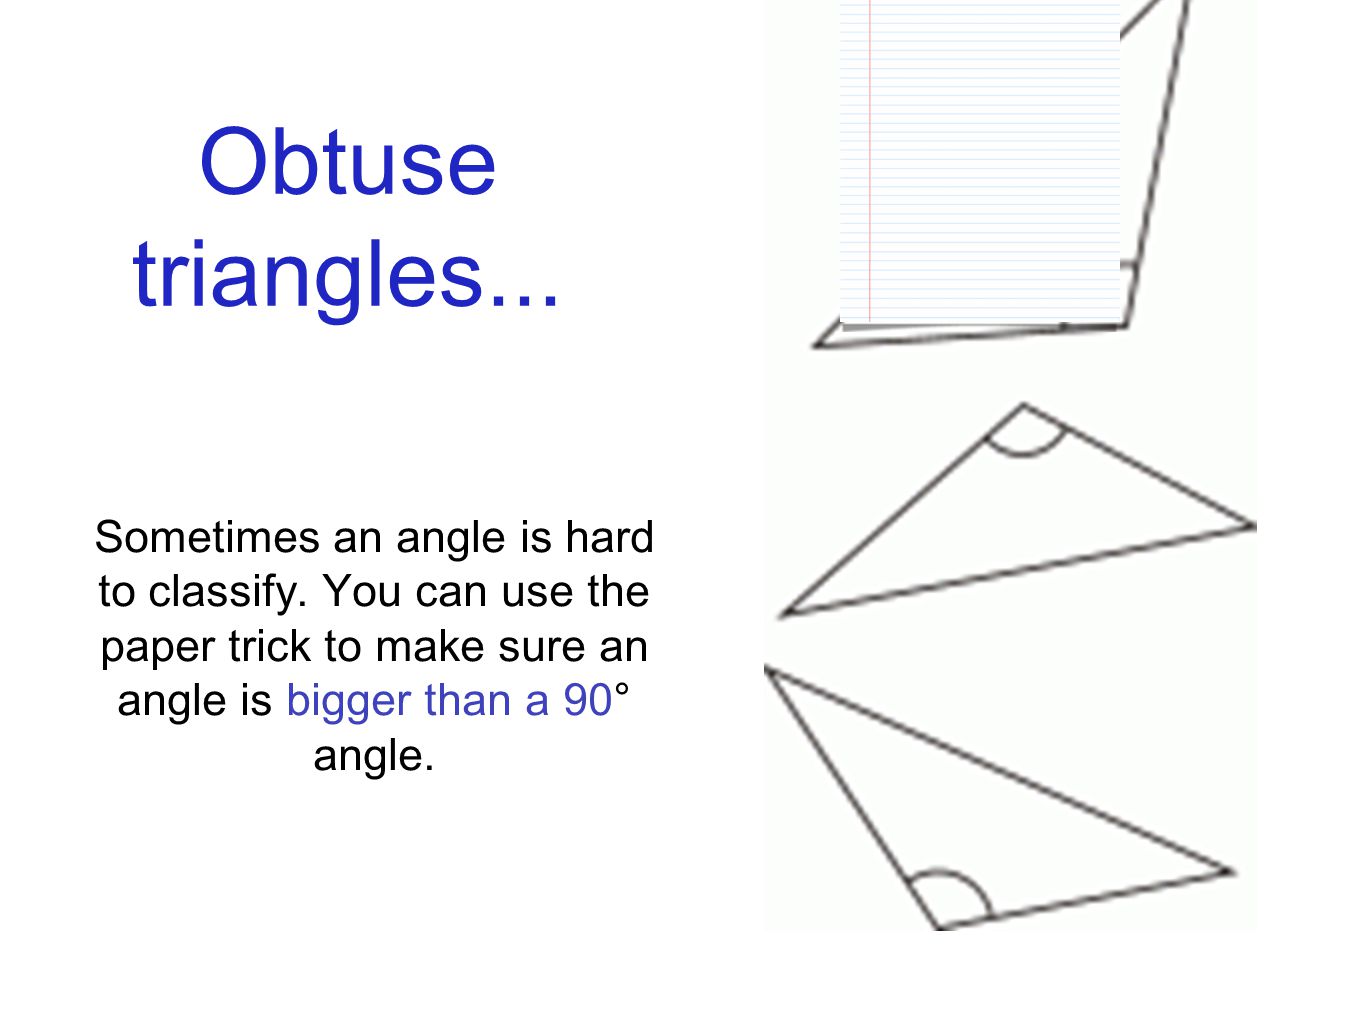 Obtuse triangles... Sometimes an angle is hard to classify.